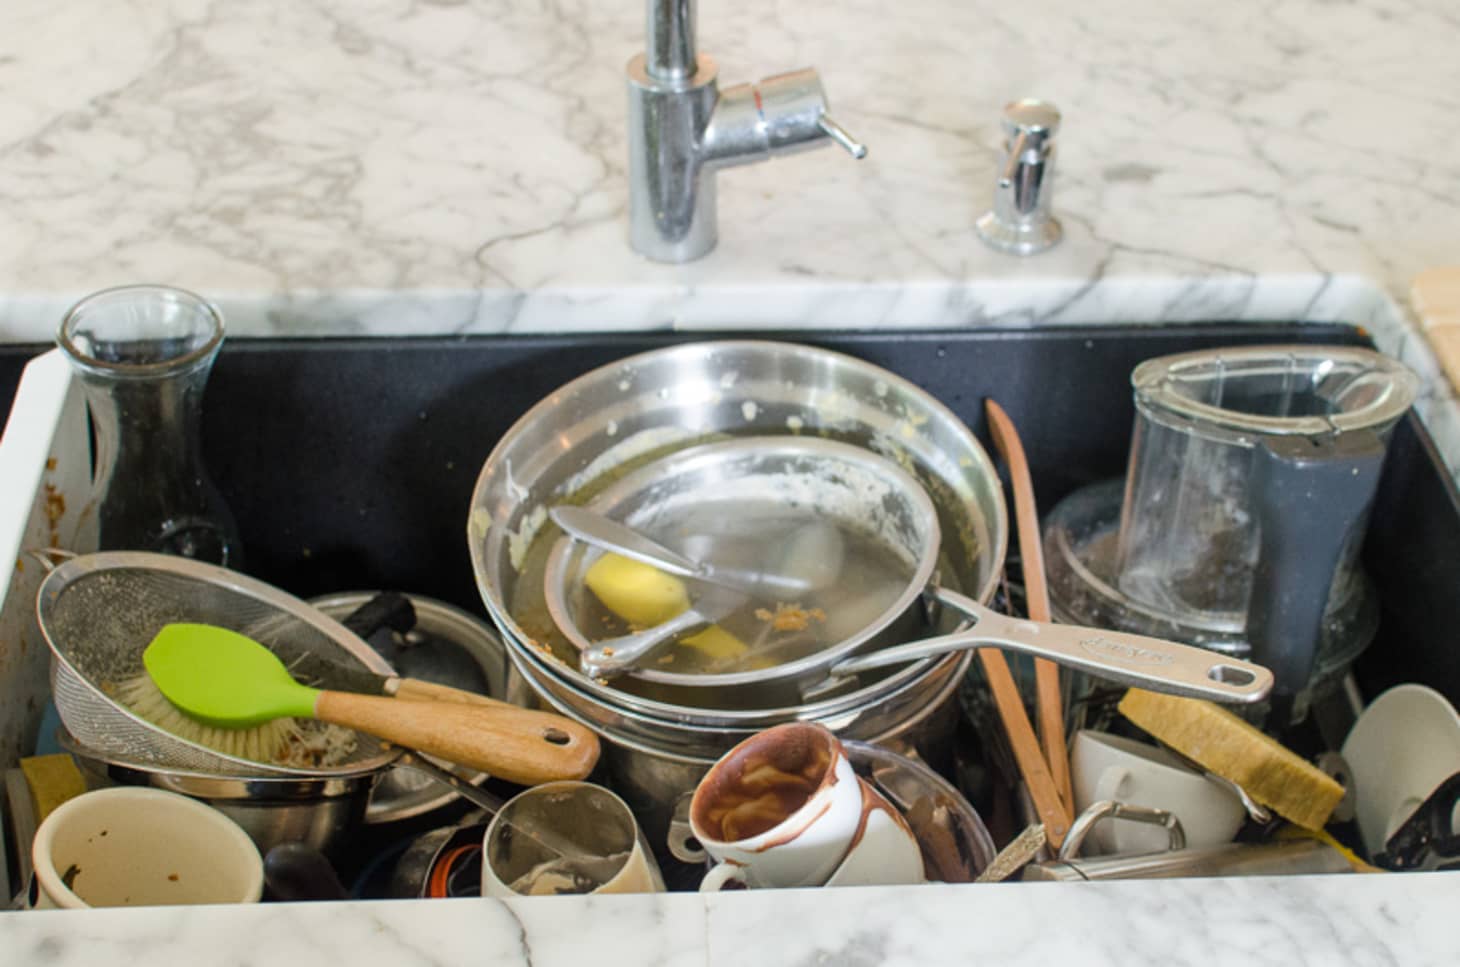 12 Ways To Make Washing Dishes Better Faster And More Fun